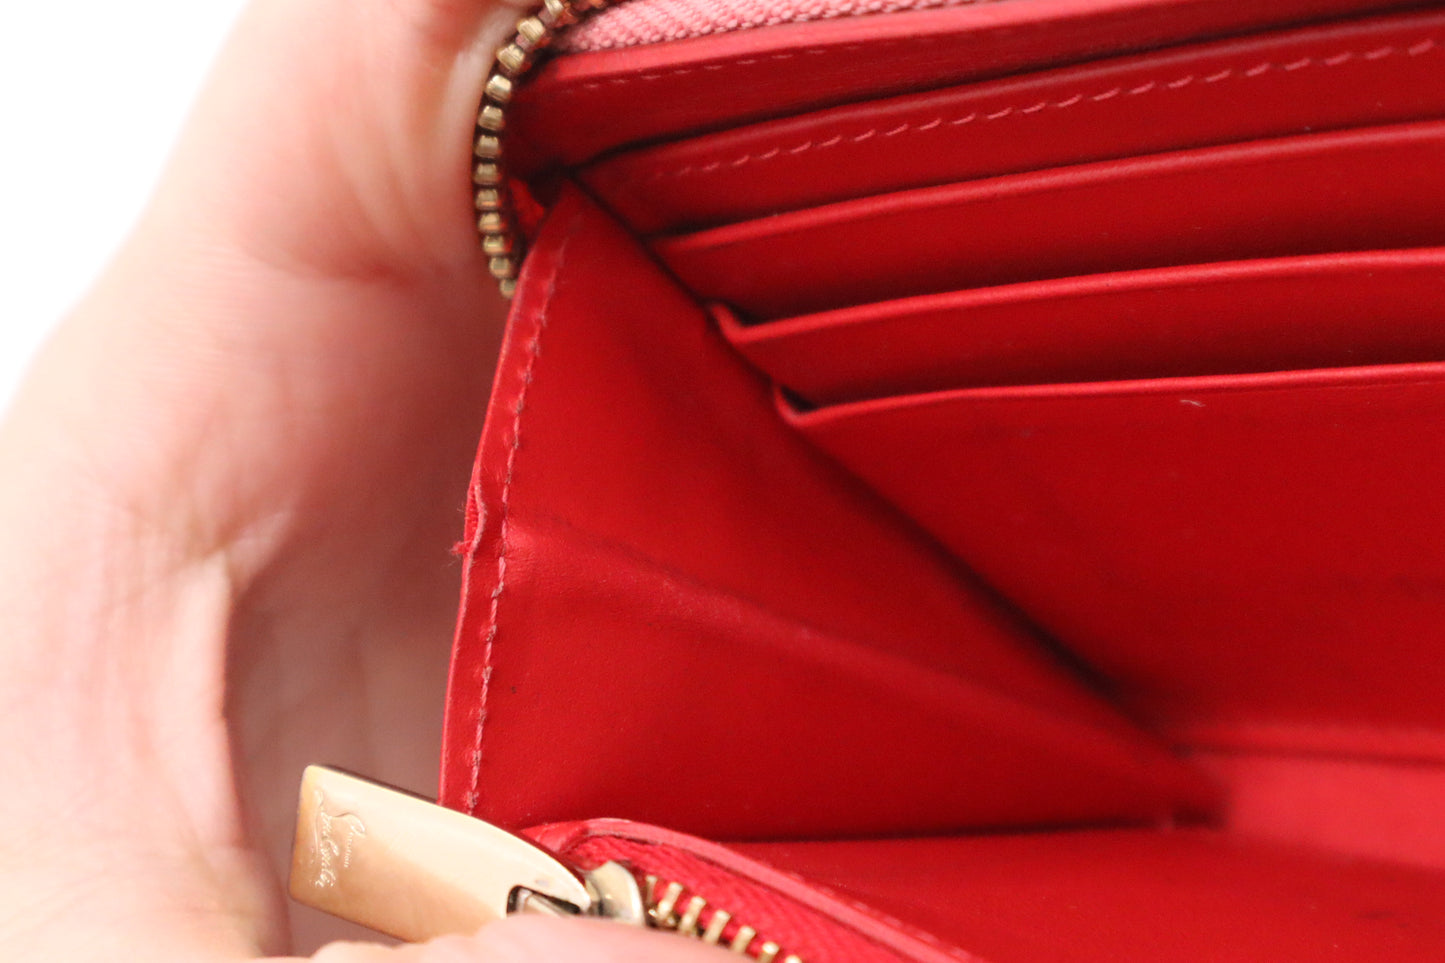 Louboutin Panettone Zippy Wallet in Pink Leather